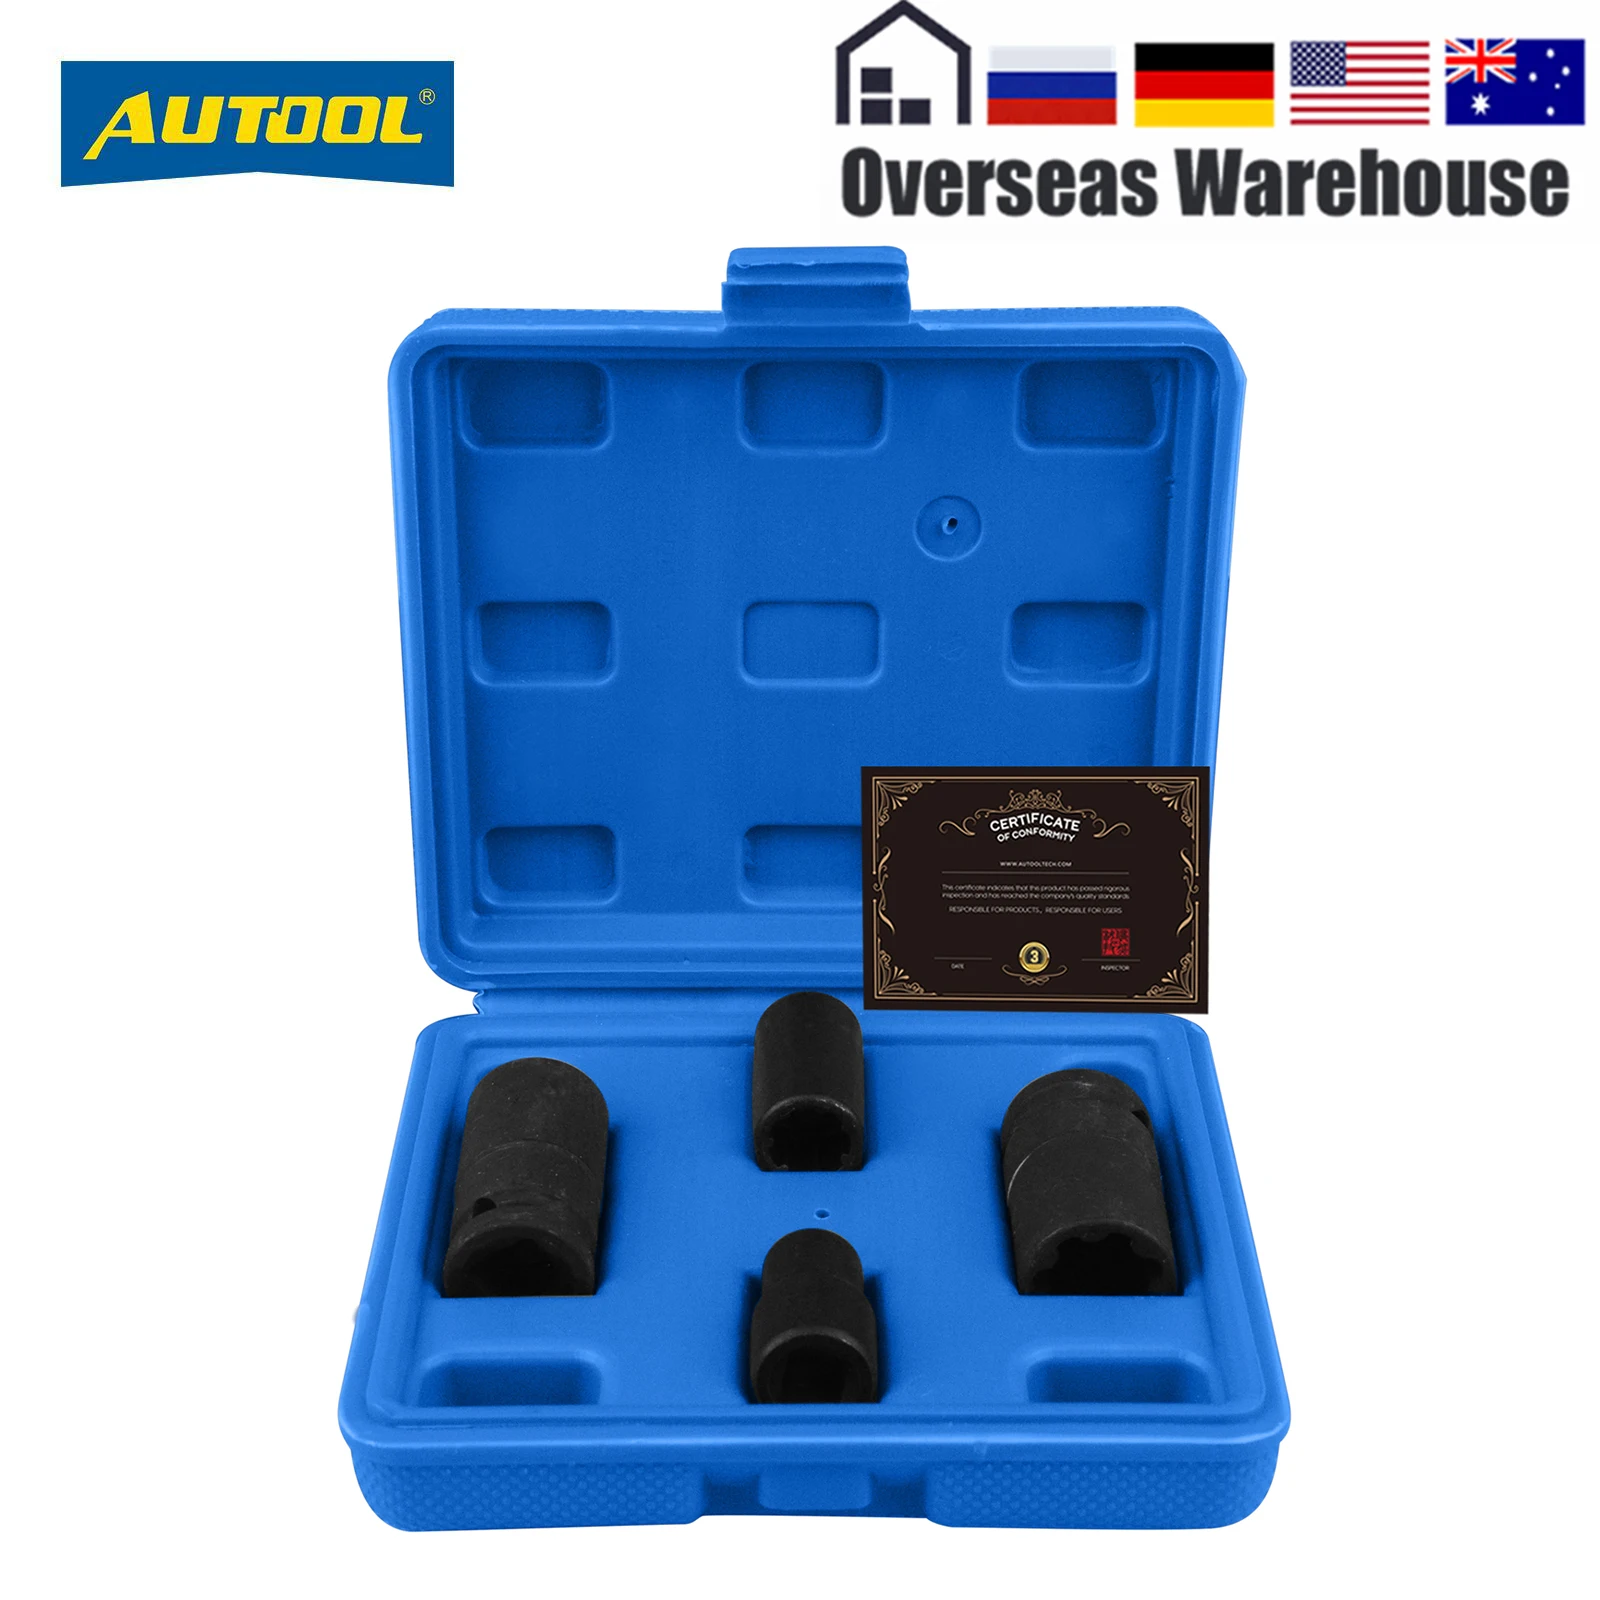 

AUTOOL Car Brake Caliper Screw Socket Removal Tool for AUDI A8 S6 Porsche Cayenne Brake Pad Screw Disassembly Tool